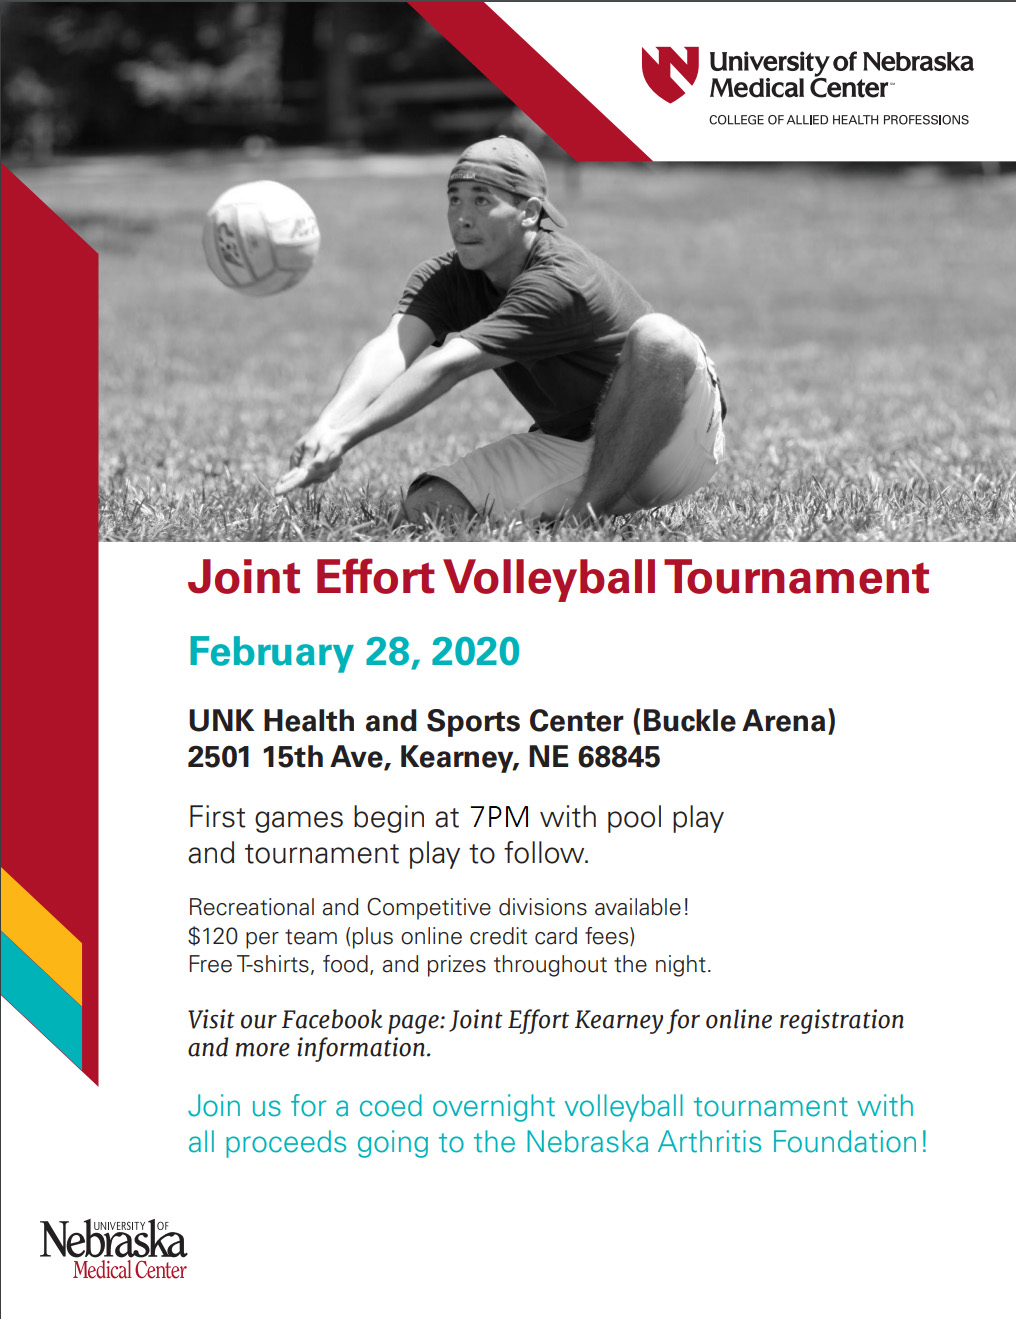 Joint Effort is a co-ed 6v6 volleyball tournament hosted by UNMC Physical Therapy students. $120/team guarantees 3 games, t-shirts, food and raffle prizes! There are competitive and recreational divisions. All proceeds go to NE Arthritis Foundation.